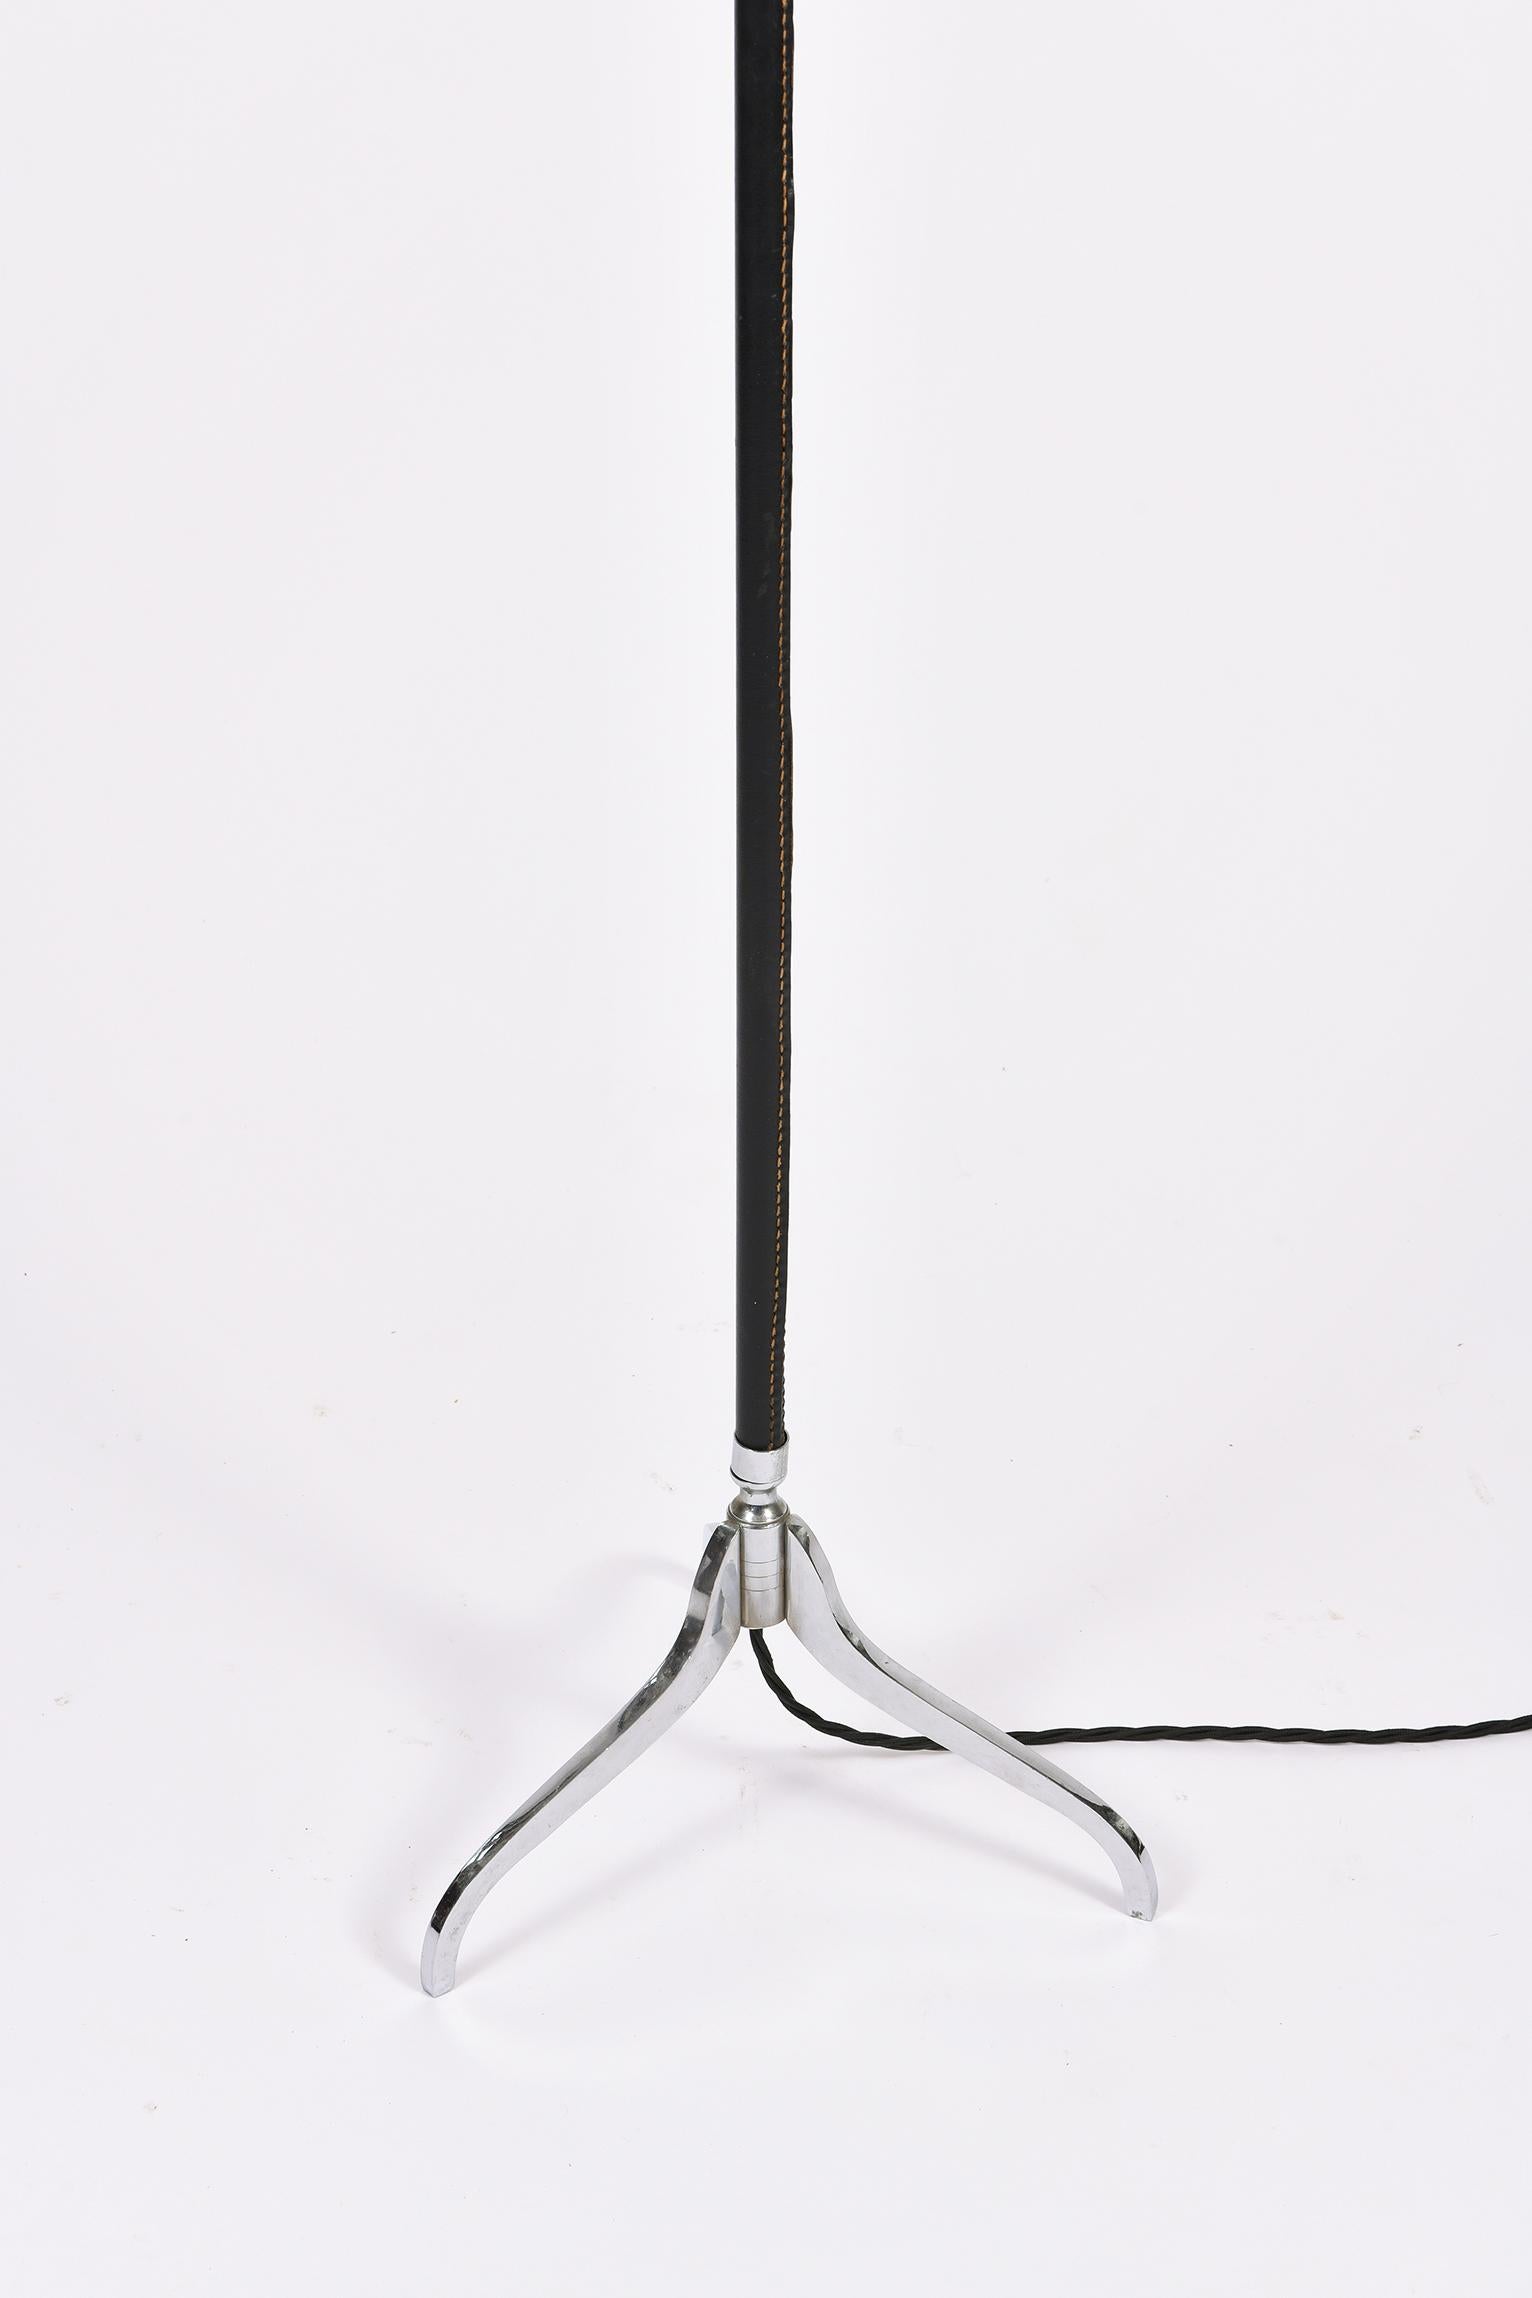 French A Jacques Adnet Style black leather and nickel plated brass tripod floor lamp